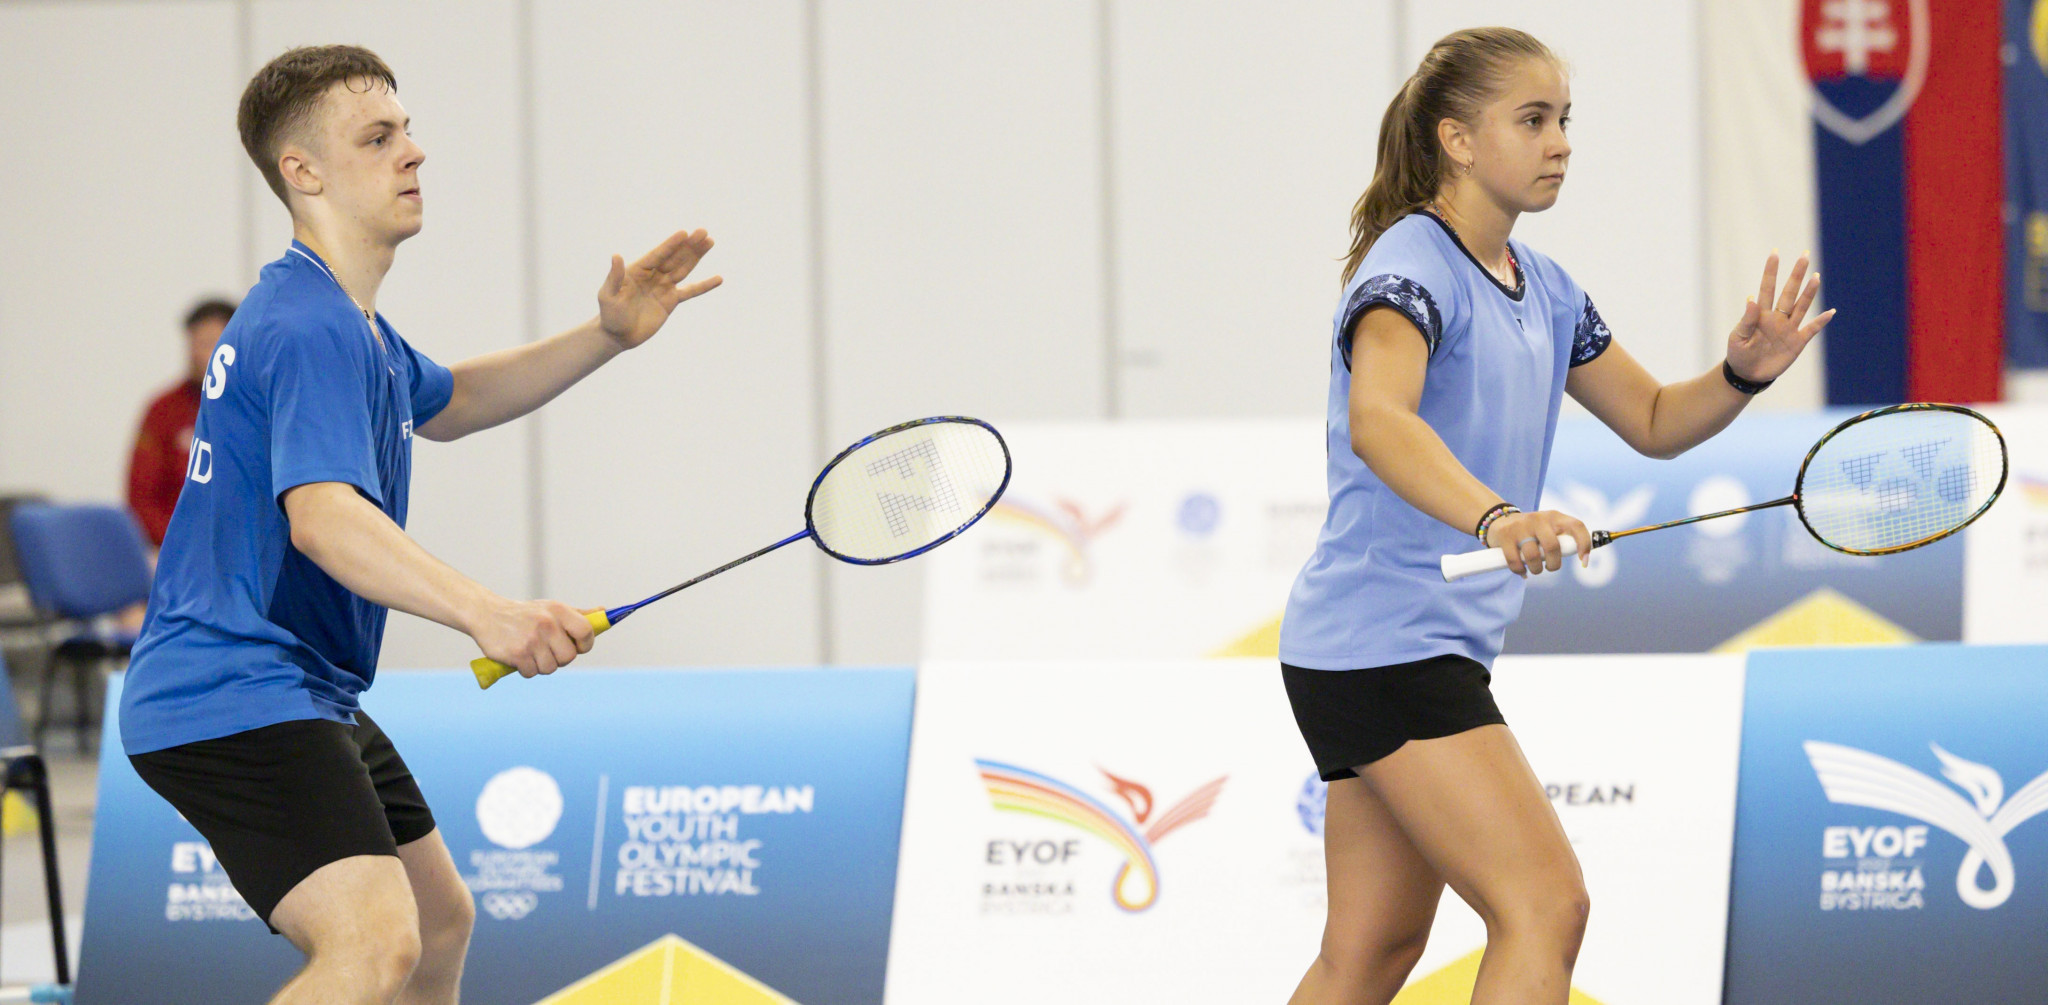 Badminton is due to be dropped from the EYOF programme after making only its second appearance in Banská Bystrica ©EYOF Banská Bystrica 2022